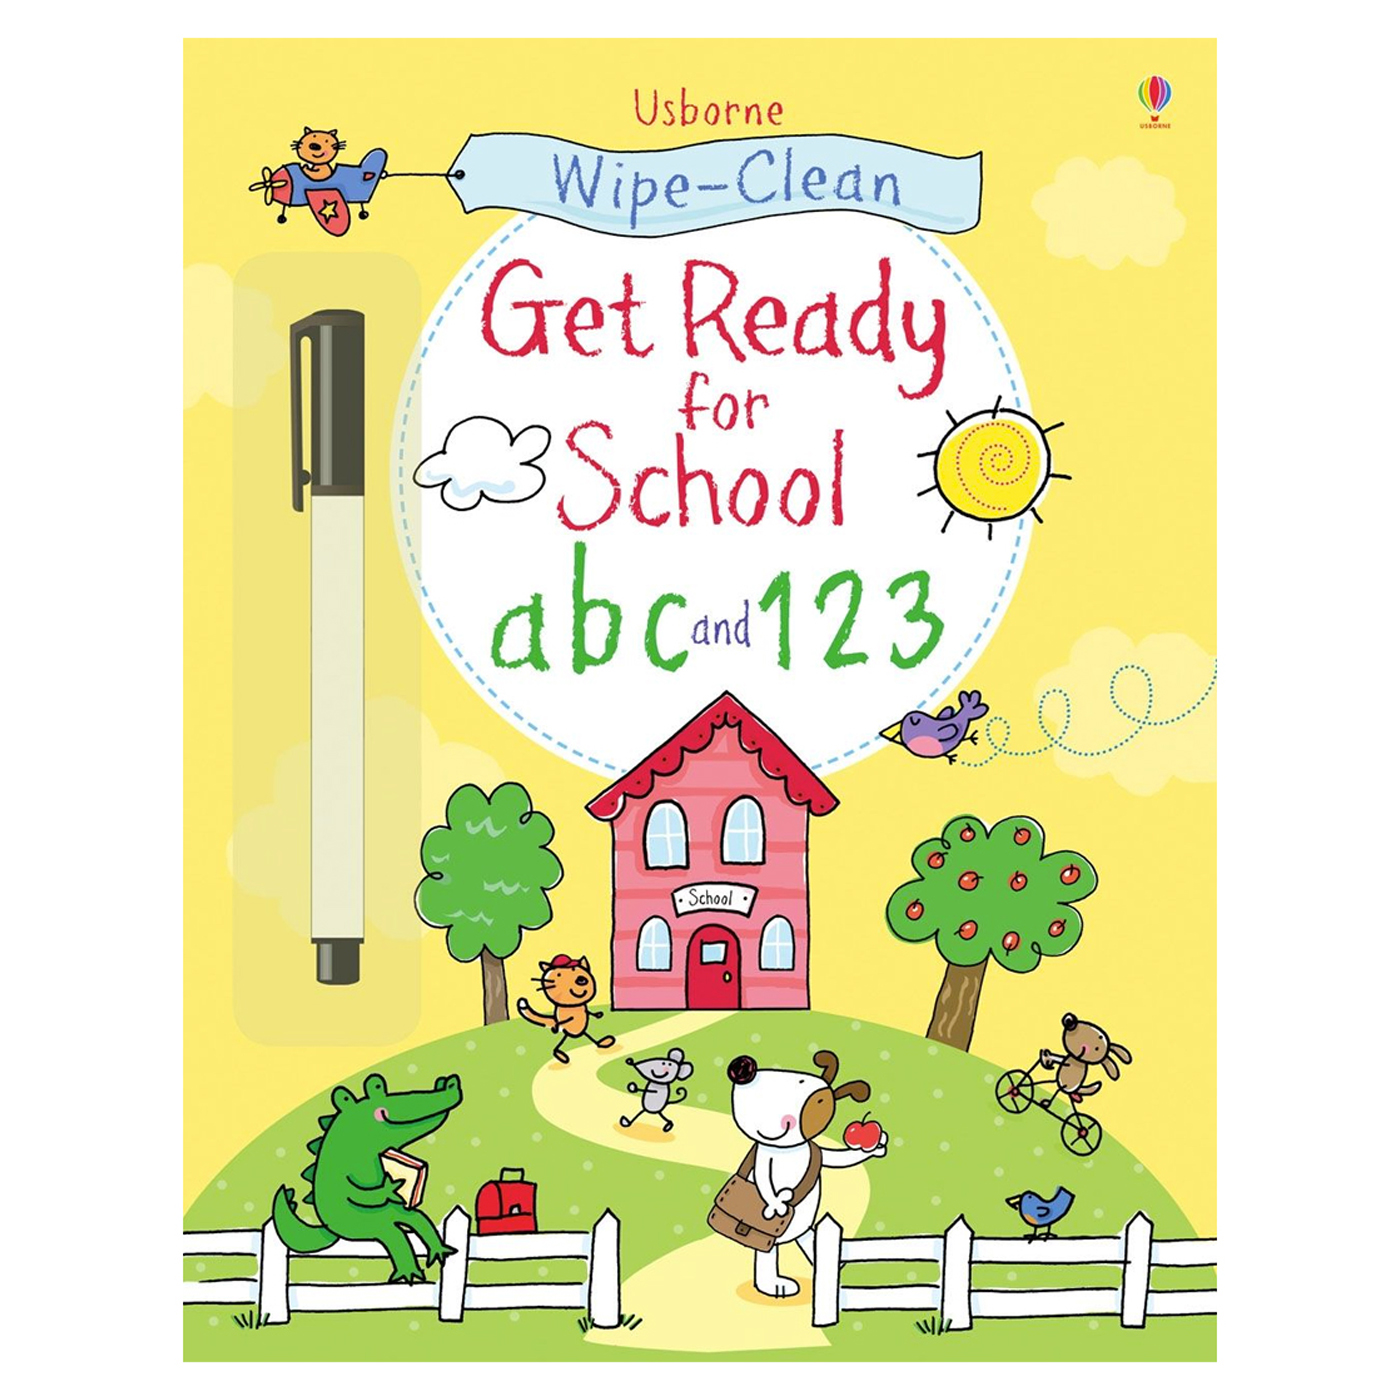 USBORNE Wipe-Clean Get Ready for School abc and 123